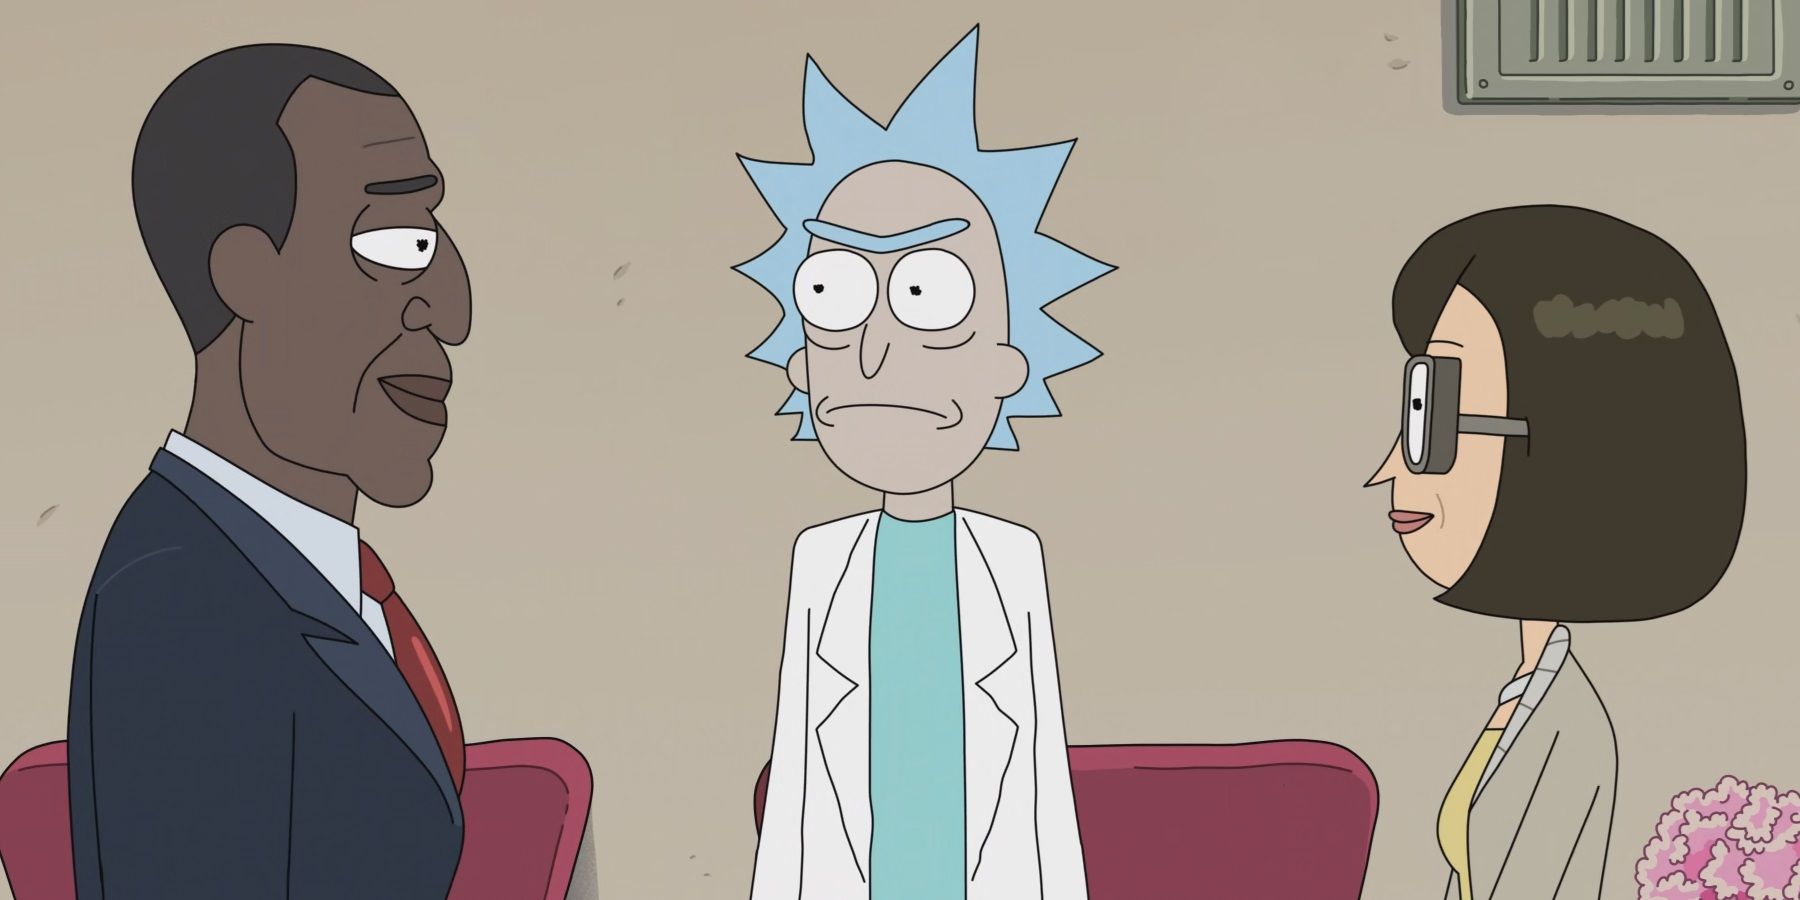 The President meets Dr Wong in Rick and Morty